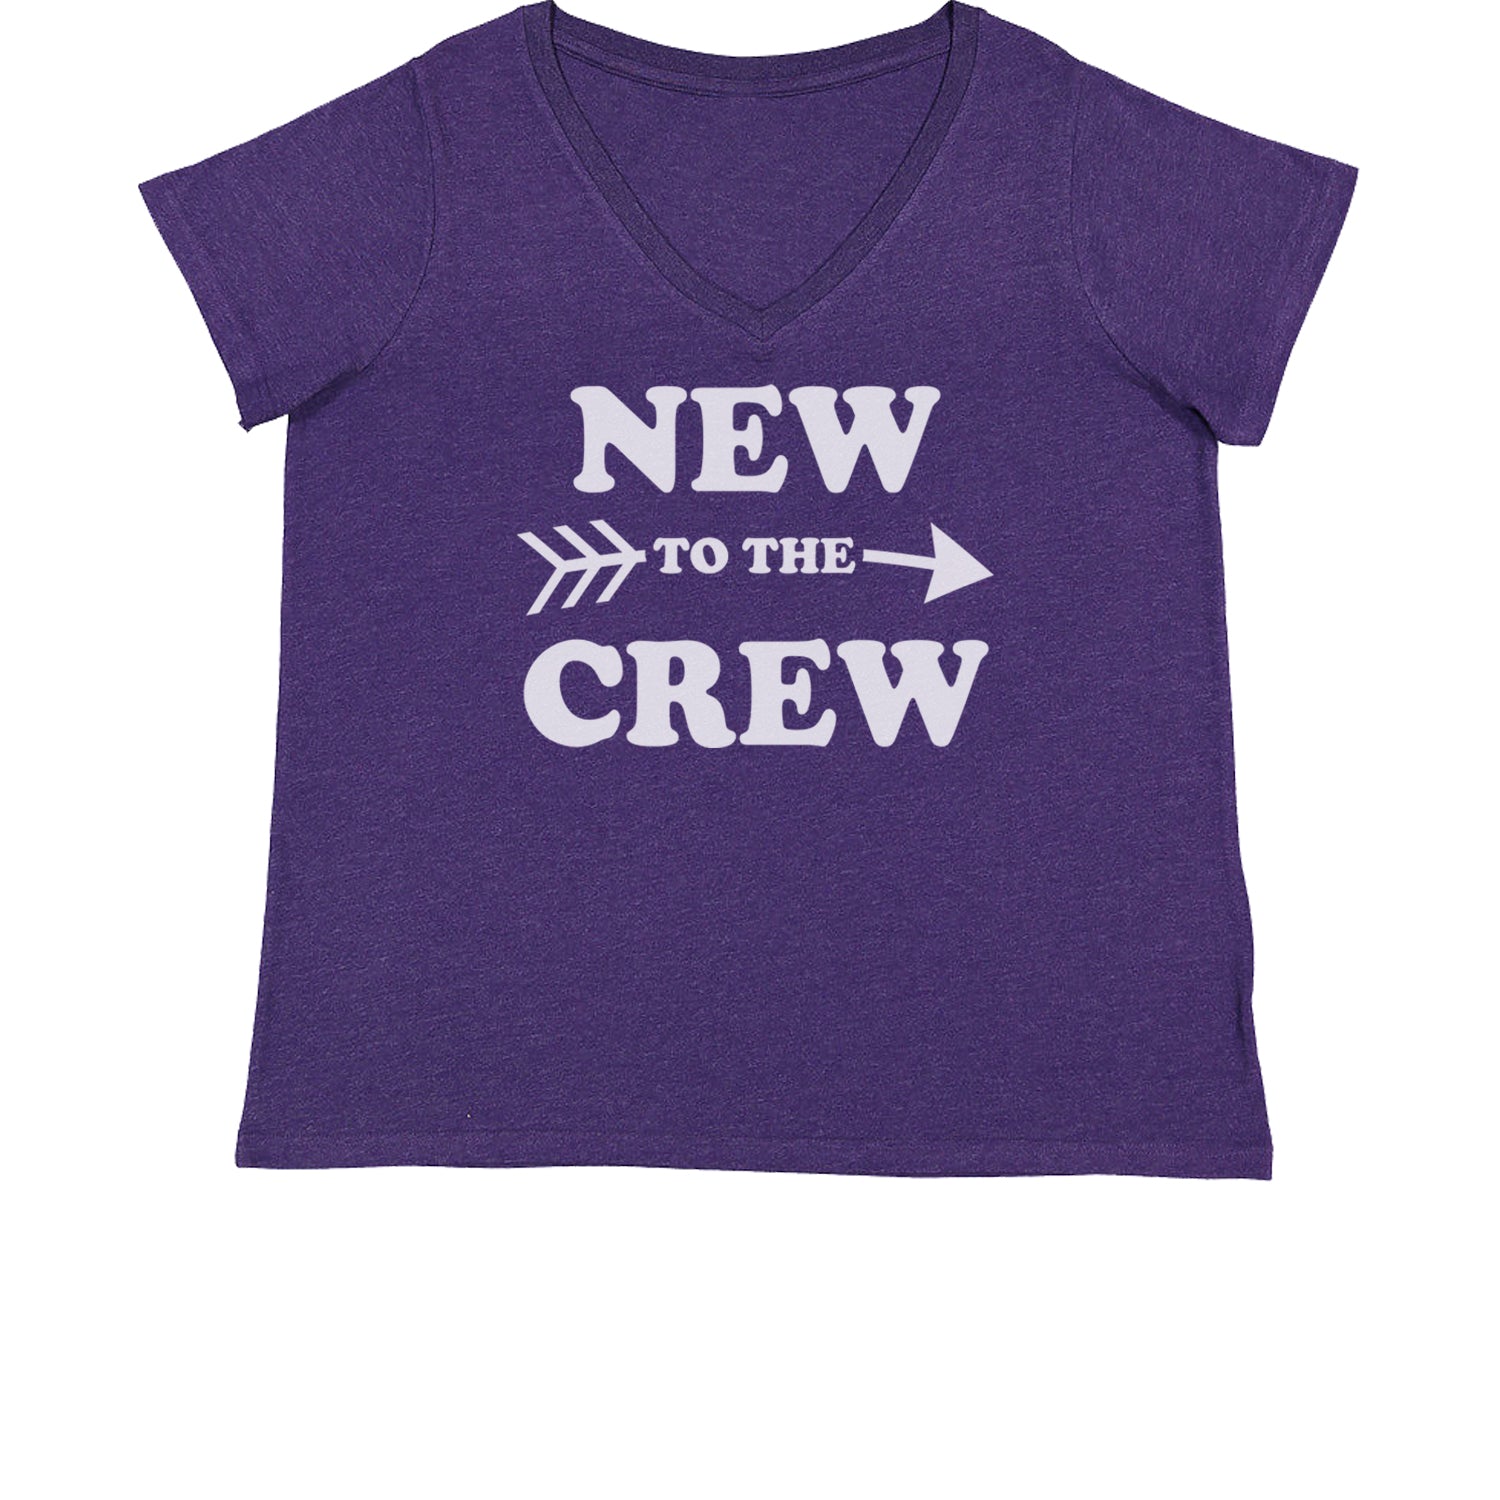 New To The Crew Womens Plus Size V-Neck T-shirt announcement, baby, cousin, gender, newborn, reveal, toddler by Expression Tees